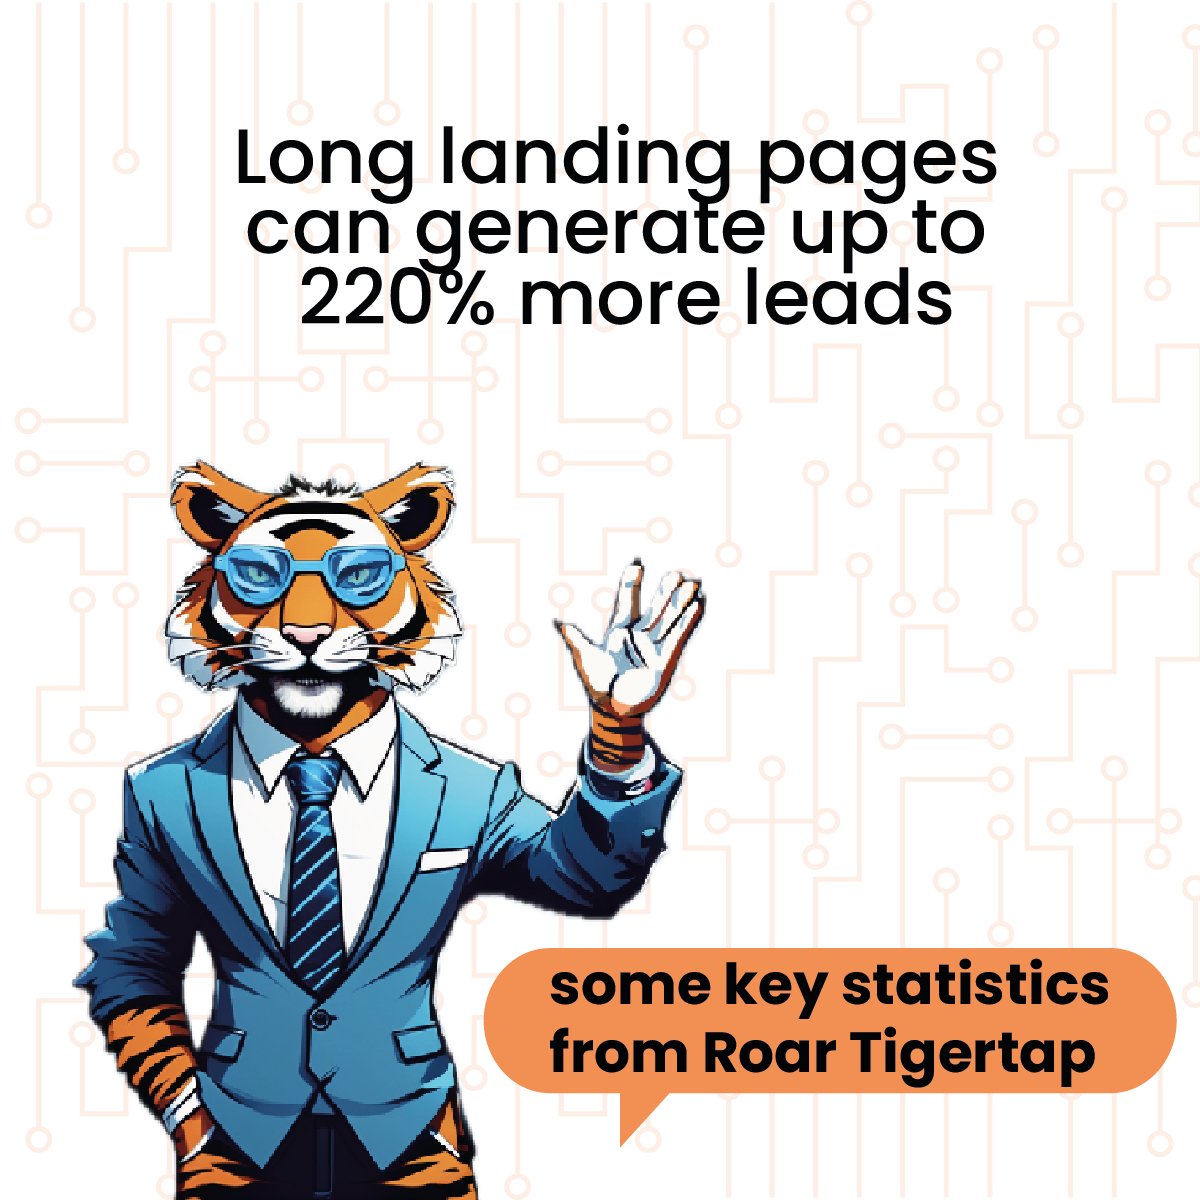 Boost sales with TigerTap! 
Some data of the importance of having a #BusinessProfile
Long pages up leads by 220%, simplicity boosts conversions by 20%, personalized content ups clicks by 75%, and custom CTAs convert 202% better. Know more: shorturl.at/BGQY2
Elevate your…